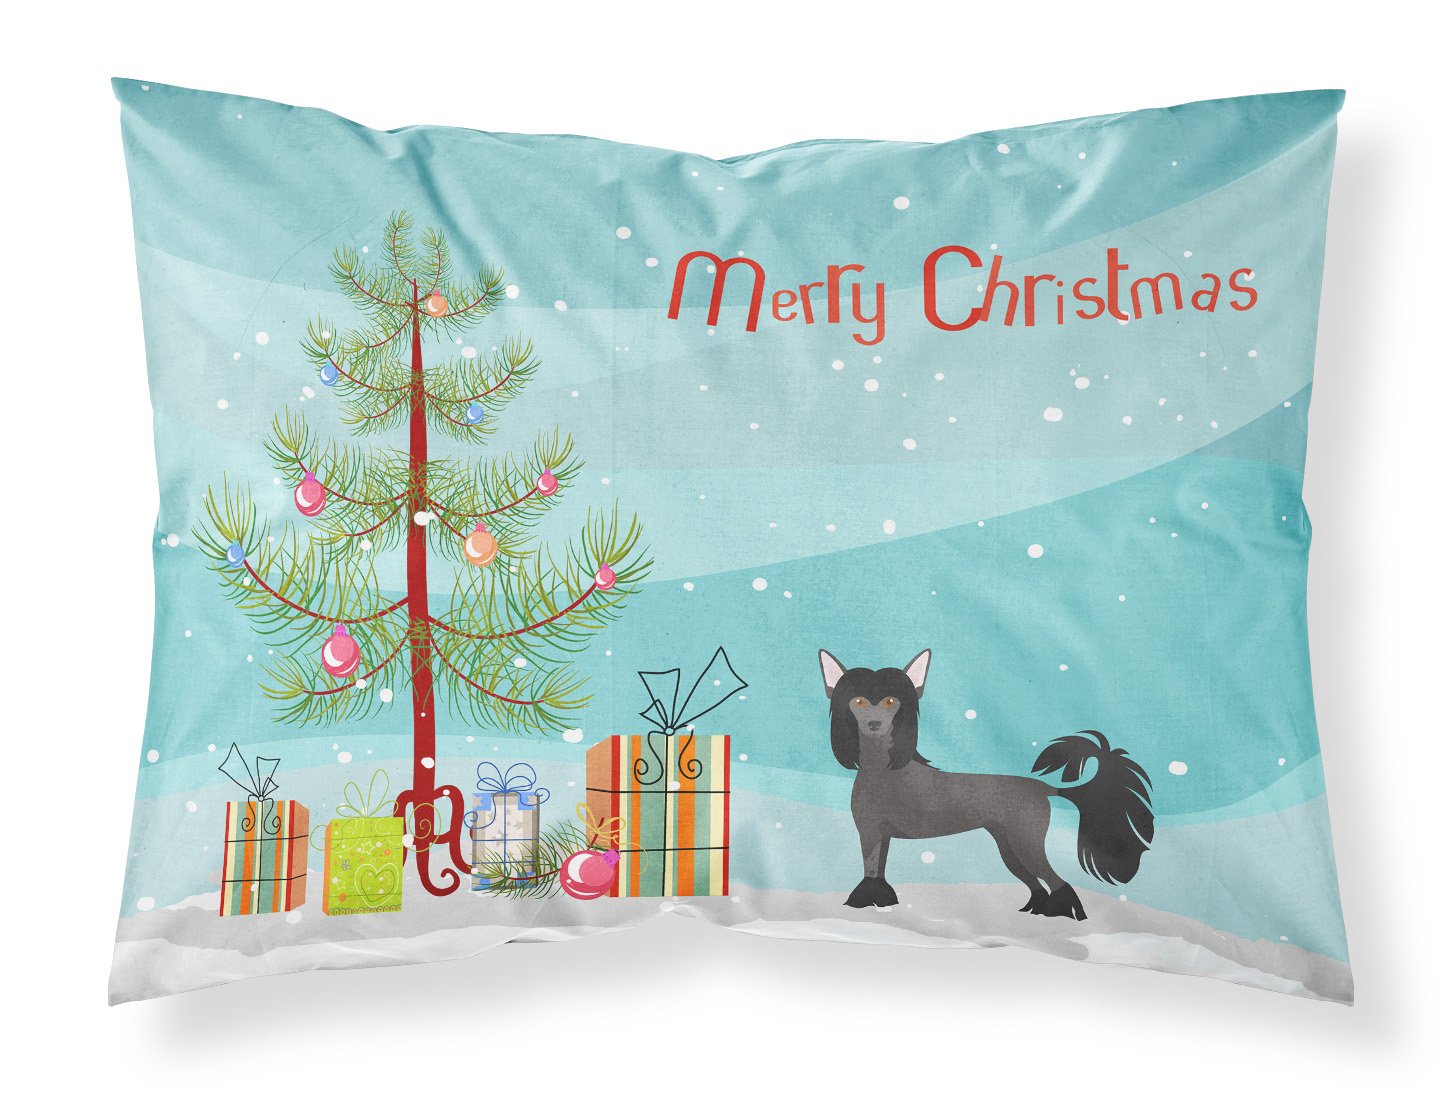 Chinese Crested Christmas Tree Fabric Standard Pillowcase CK3447PILLOWCASE by Caroline's Treasures